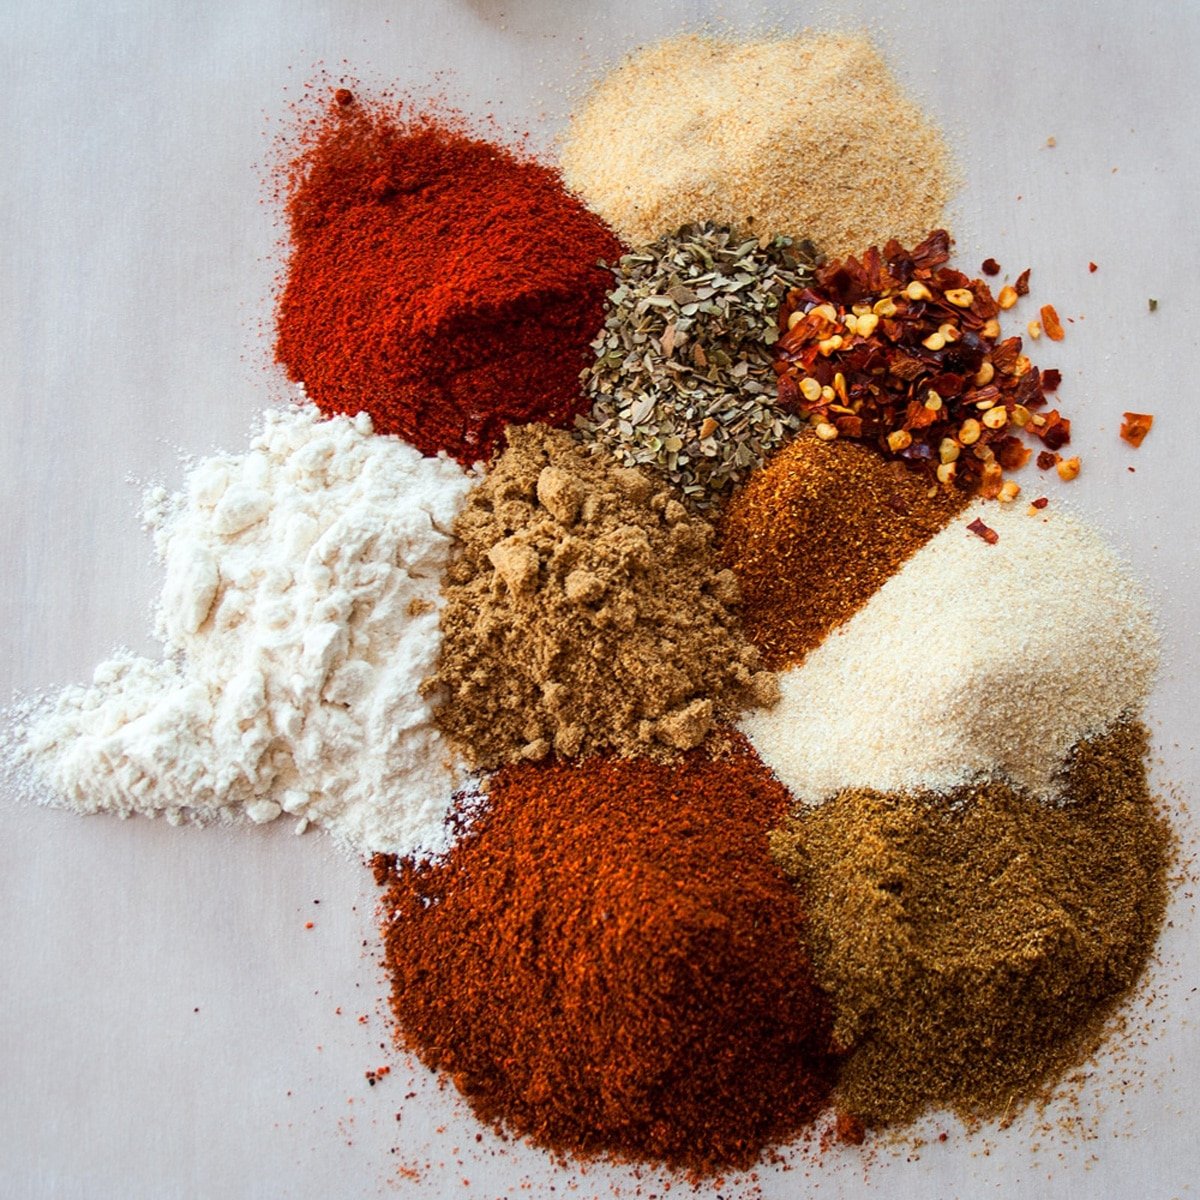 Homemade chili seasoning mix spices on a white background.